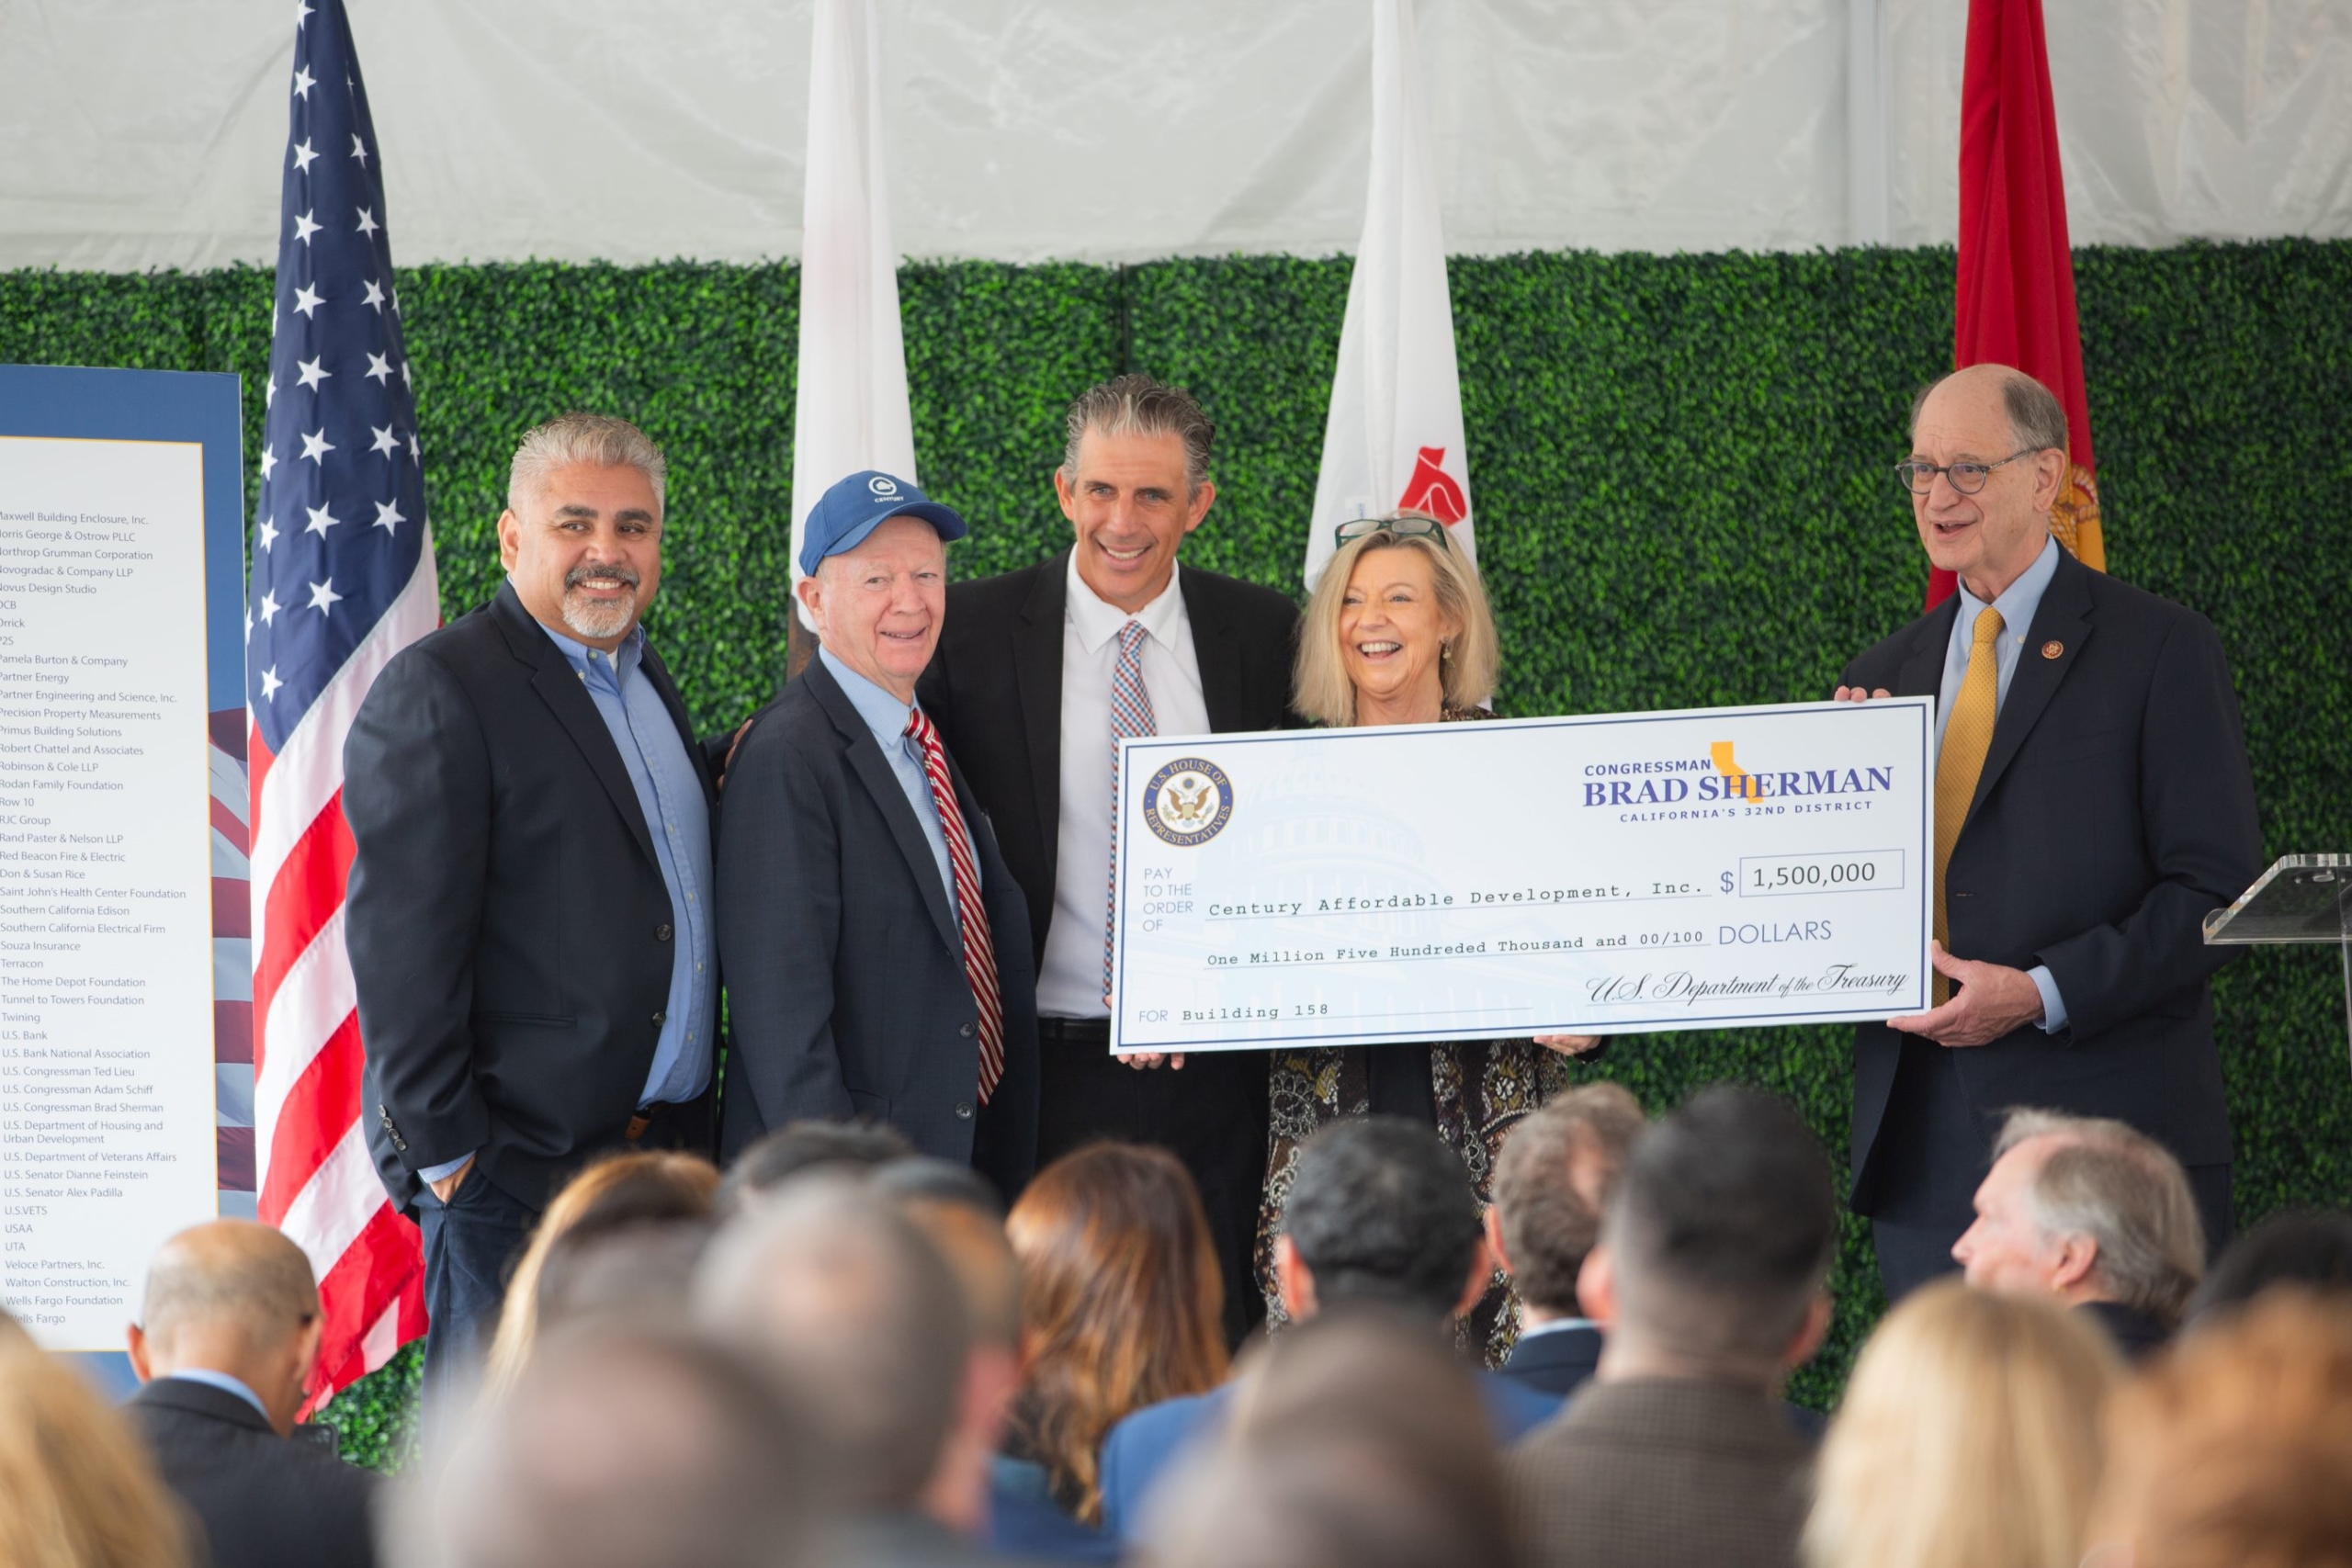 Picture of $1.5 million check being presented to VA team at ceremony from U.S. Rep. Brad Sherman